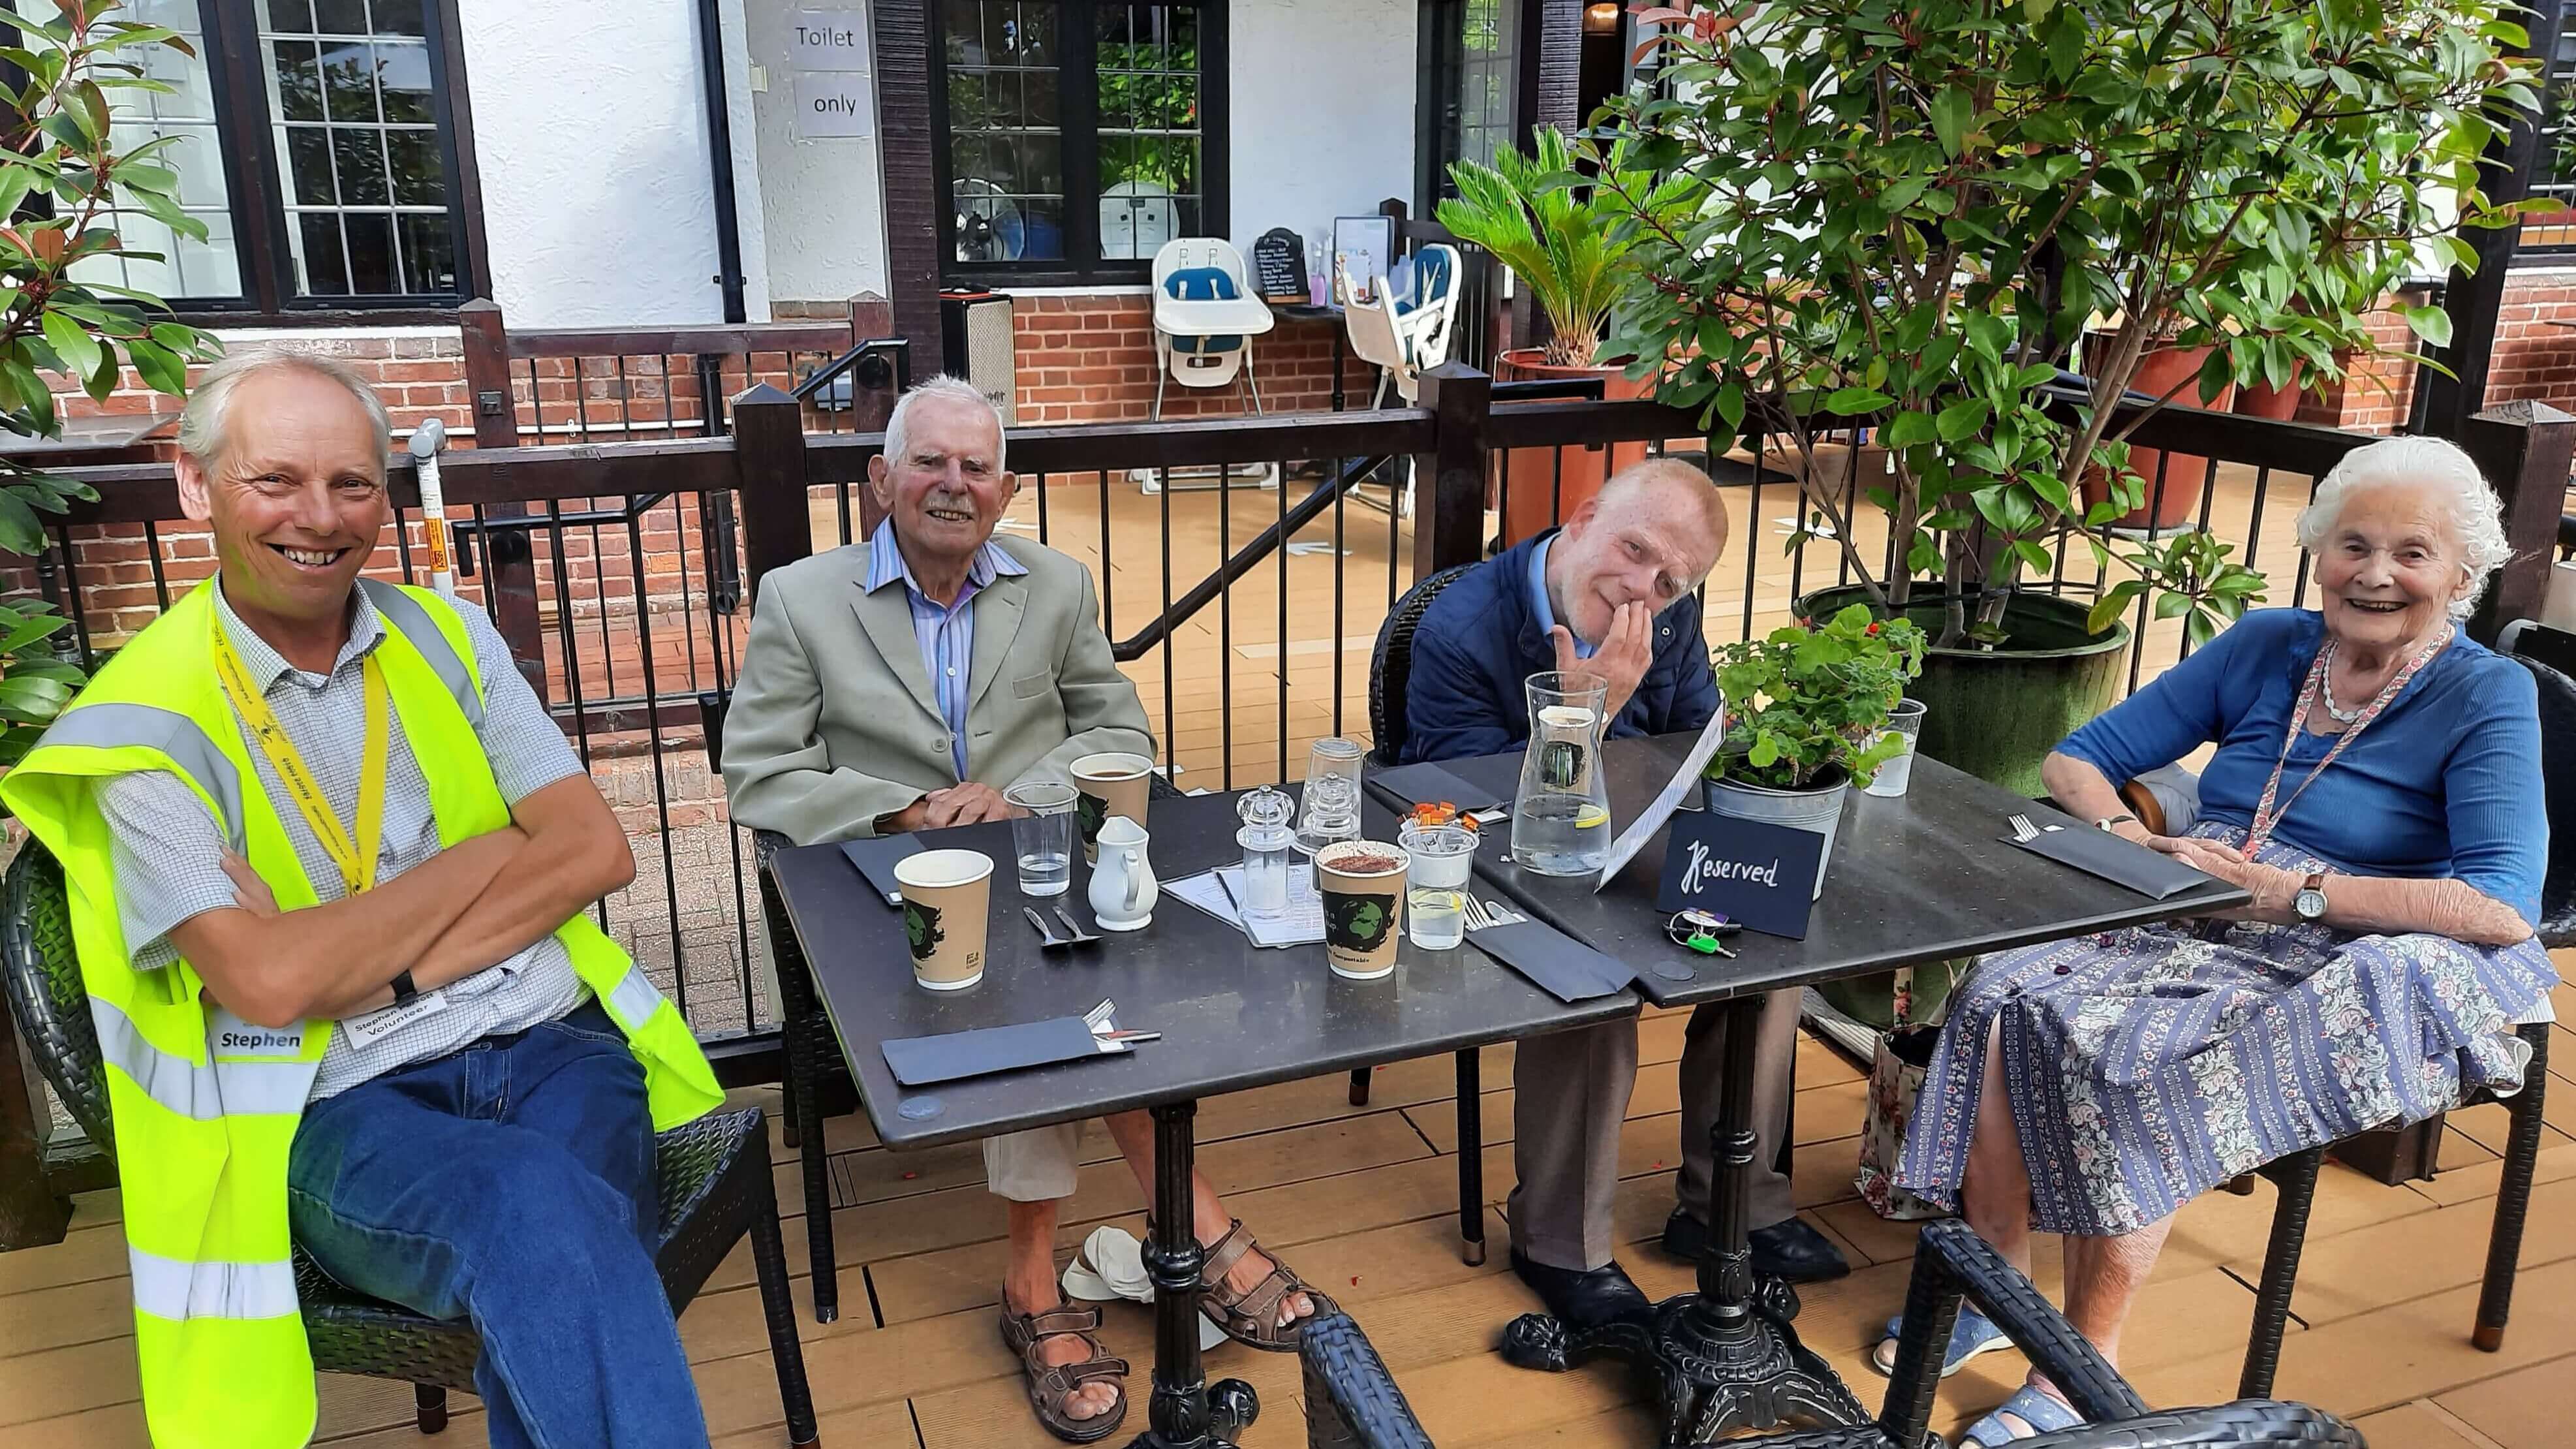 A volunteer and 3 members sitting at a table outside of a pub.